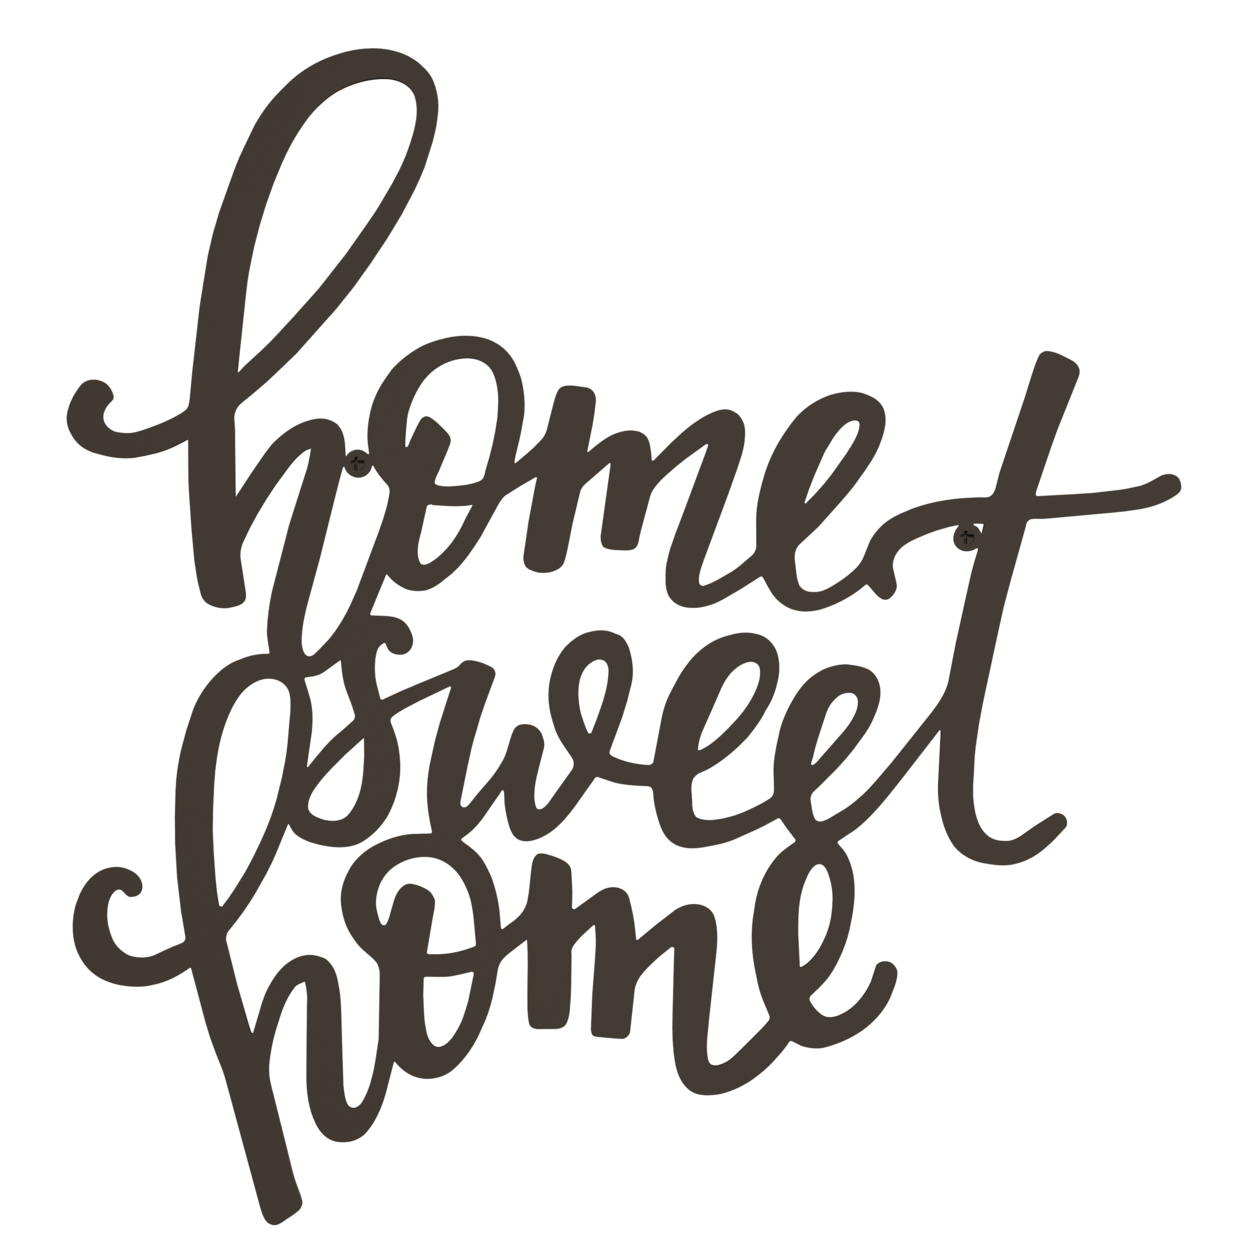 Metal Cutout- Home Sweet Home Decorative Wall Sign-3D Word Art Home Accent Decor